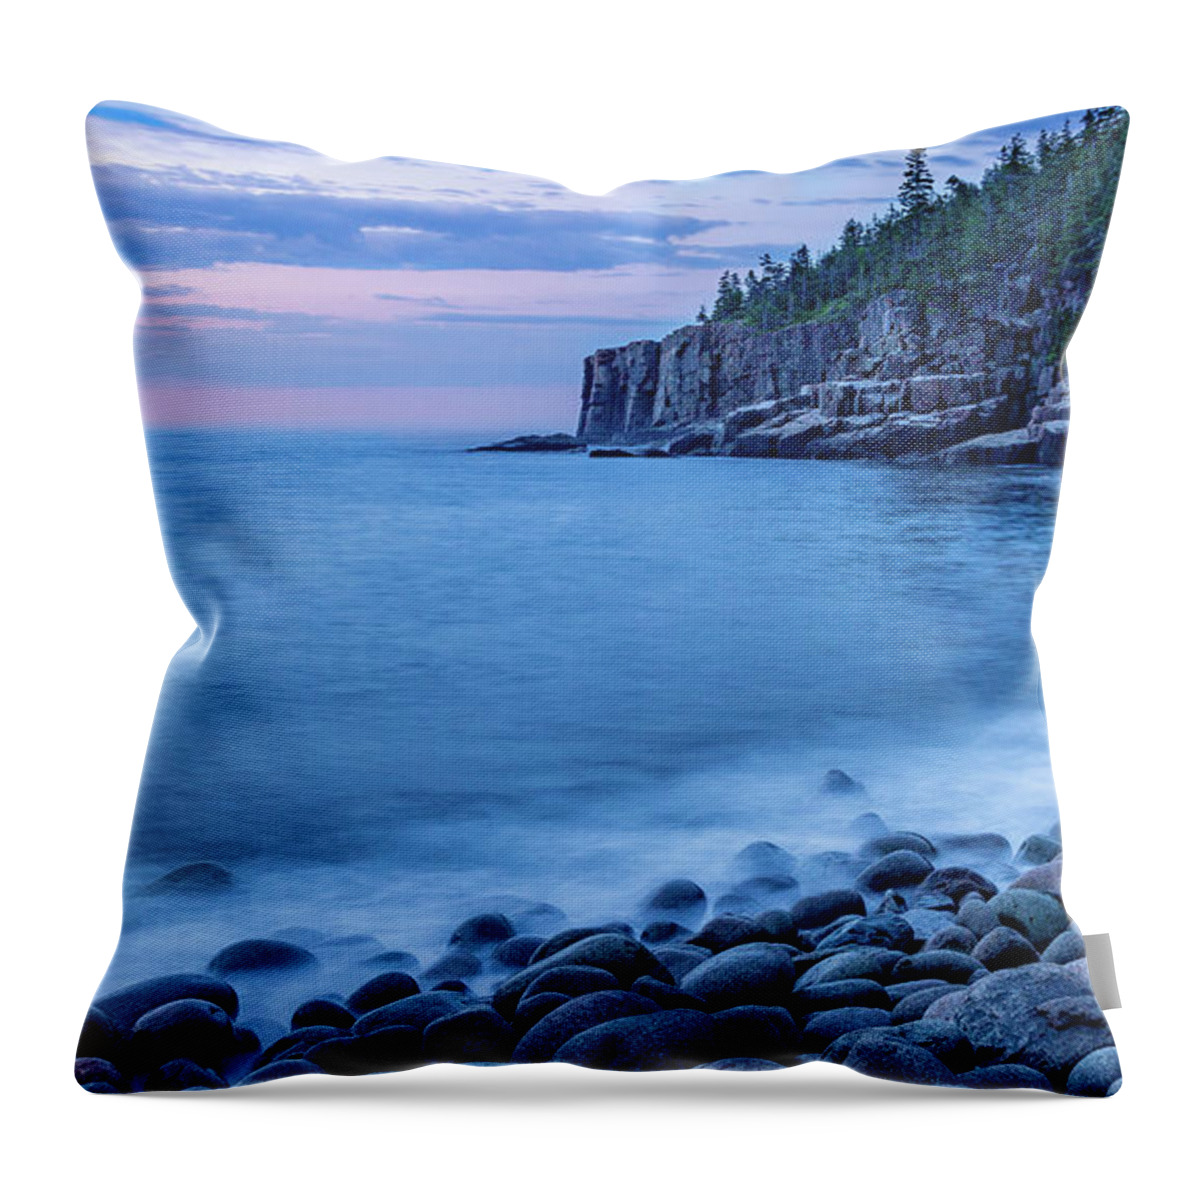 Seascape Throw Pillow featuring the photograph Boulder Beach by David Lee